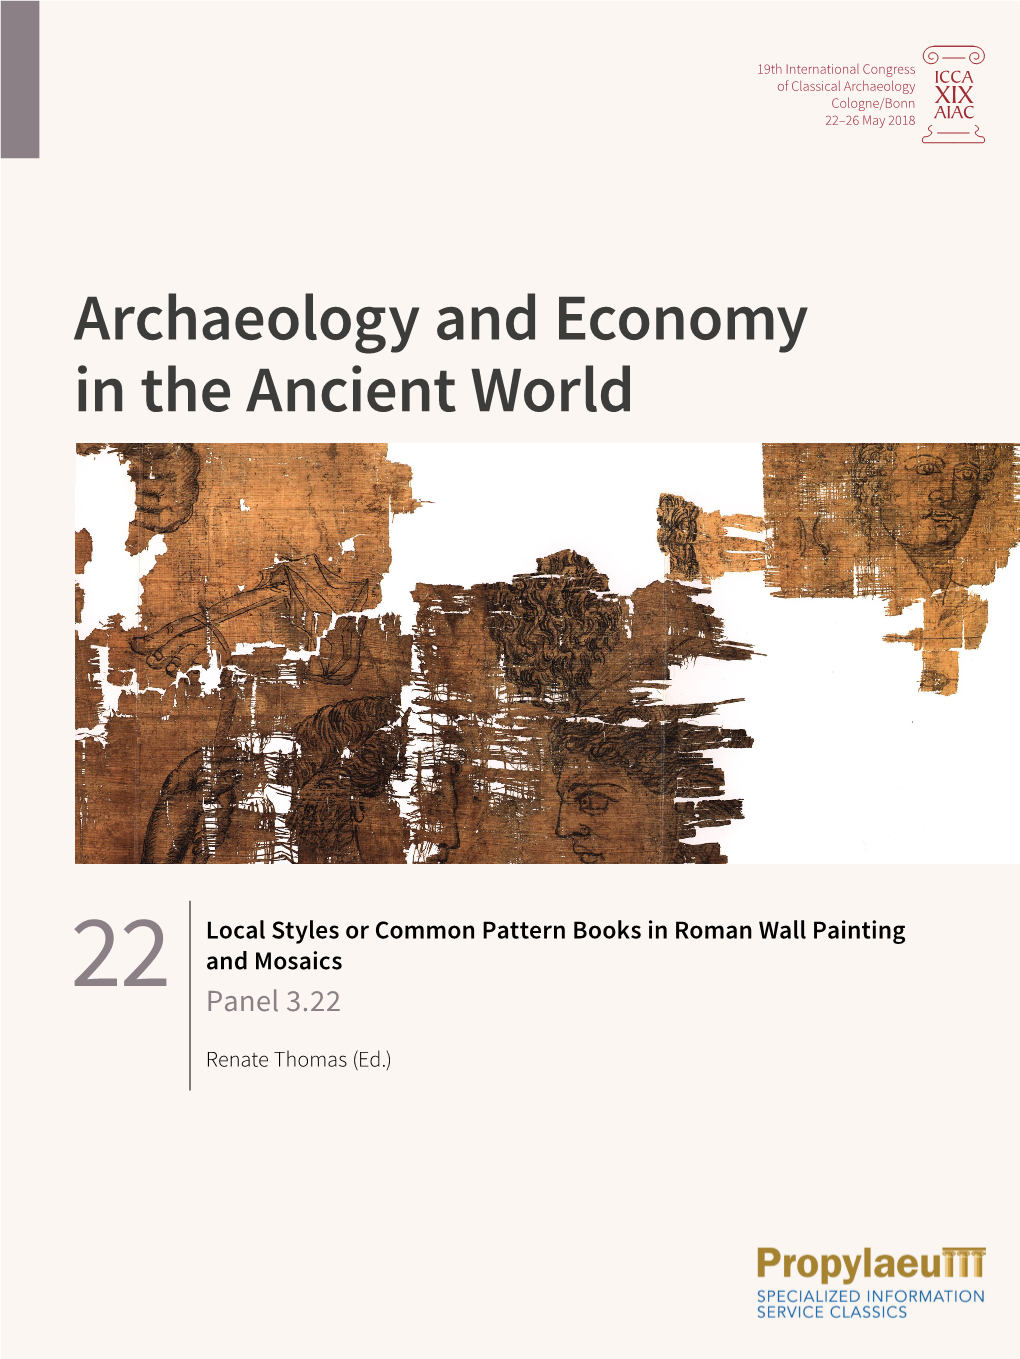 Local Styles Or Common Pattern Books in Roman Wall Painting and Mosaics 22 Panel 3.22